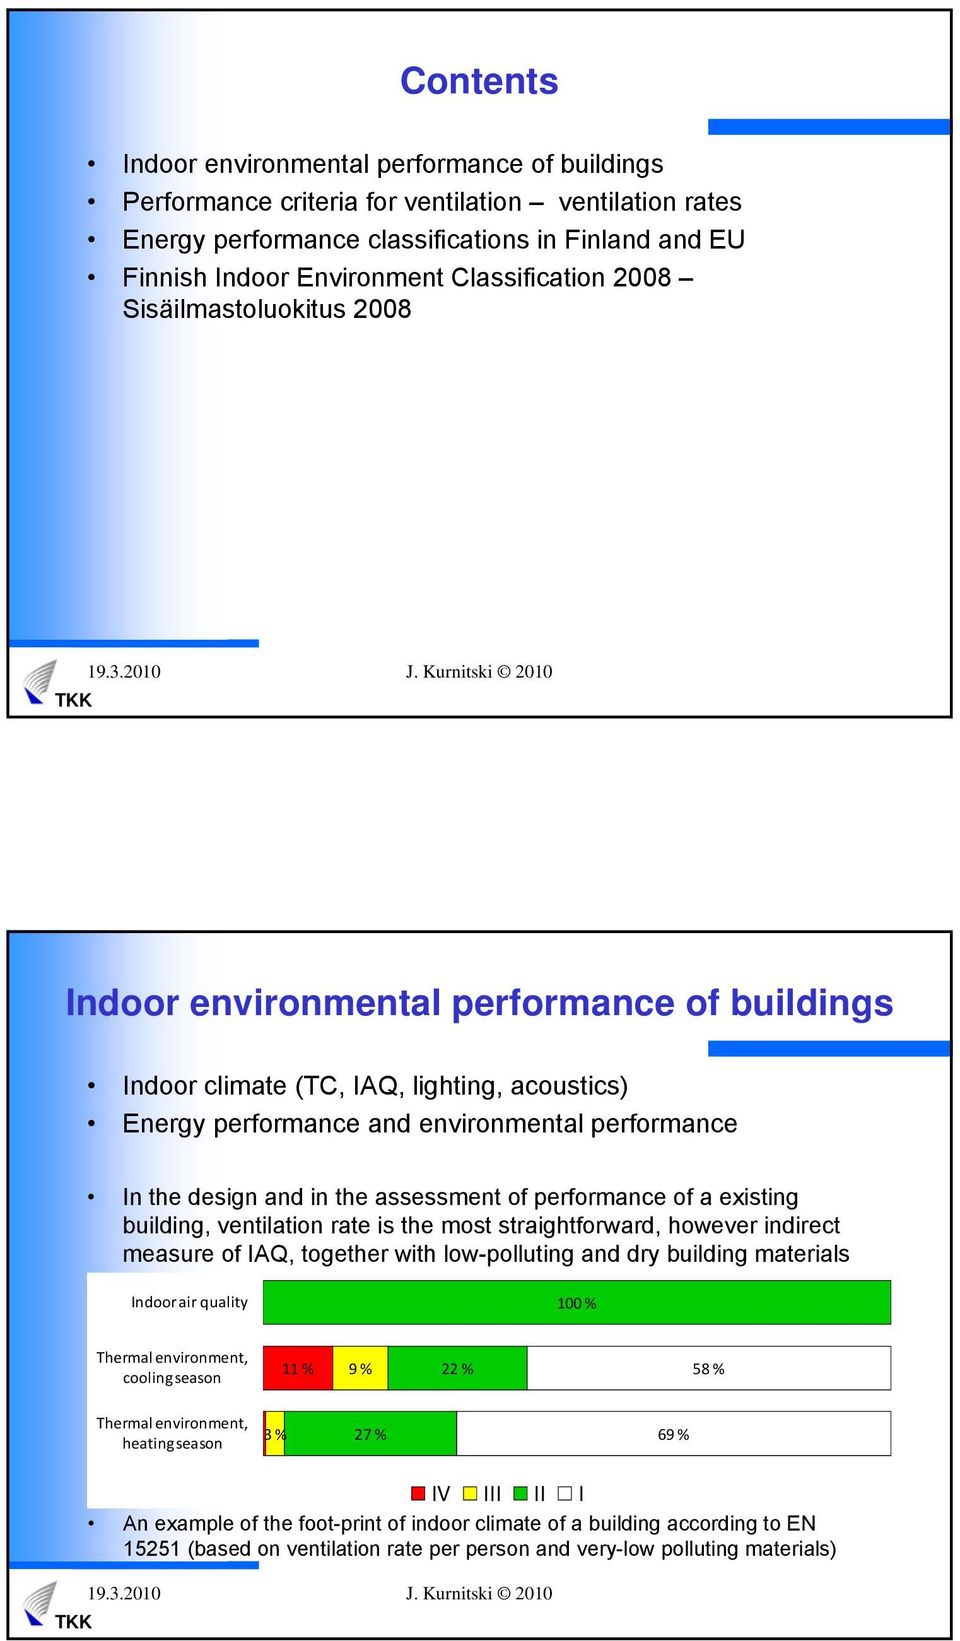 and in the assessment of performance of a existing building, ventilation rate is the most straightforward, however indirect measure of IAQ, together with low-polluting and dry building materials